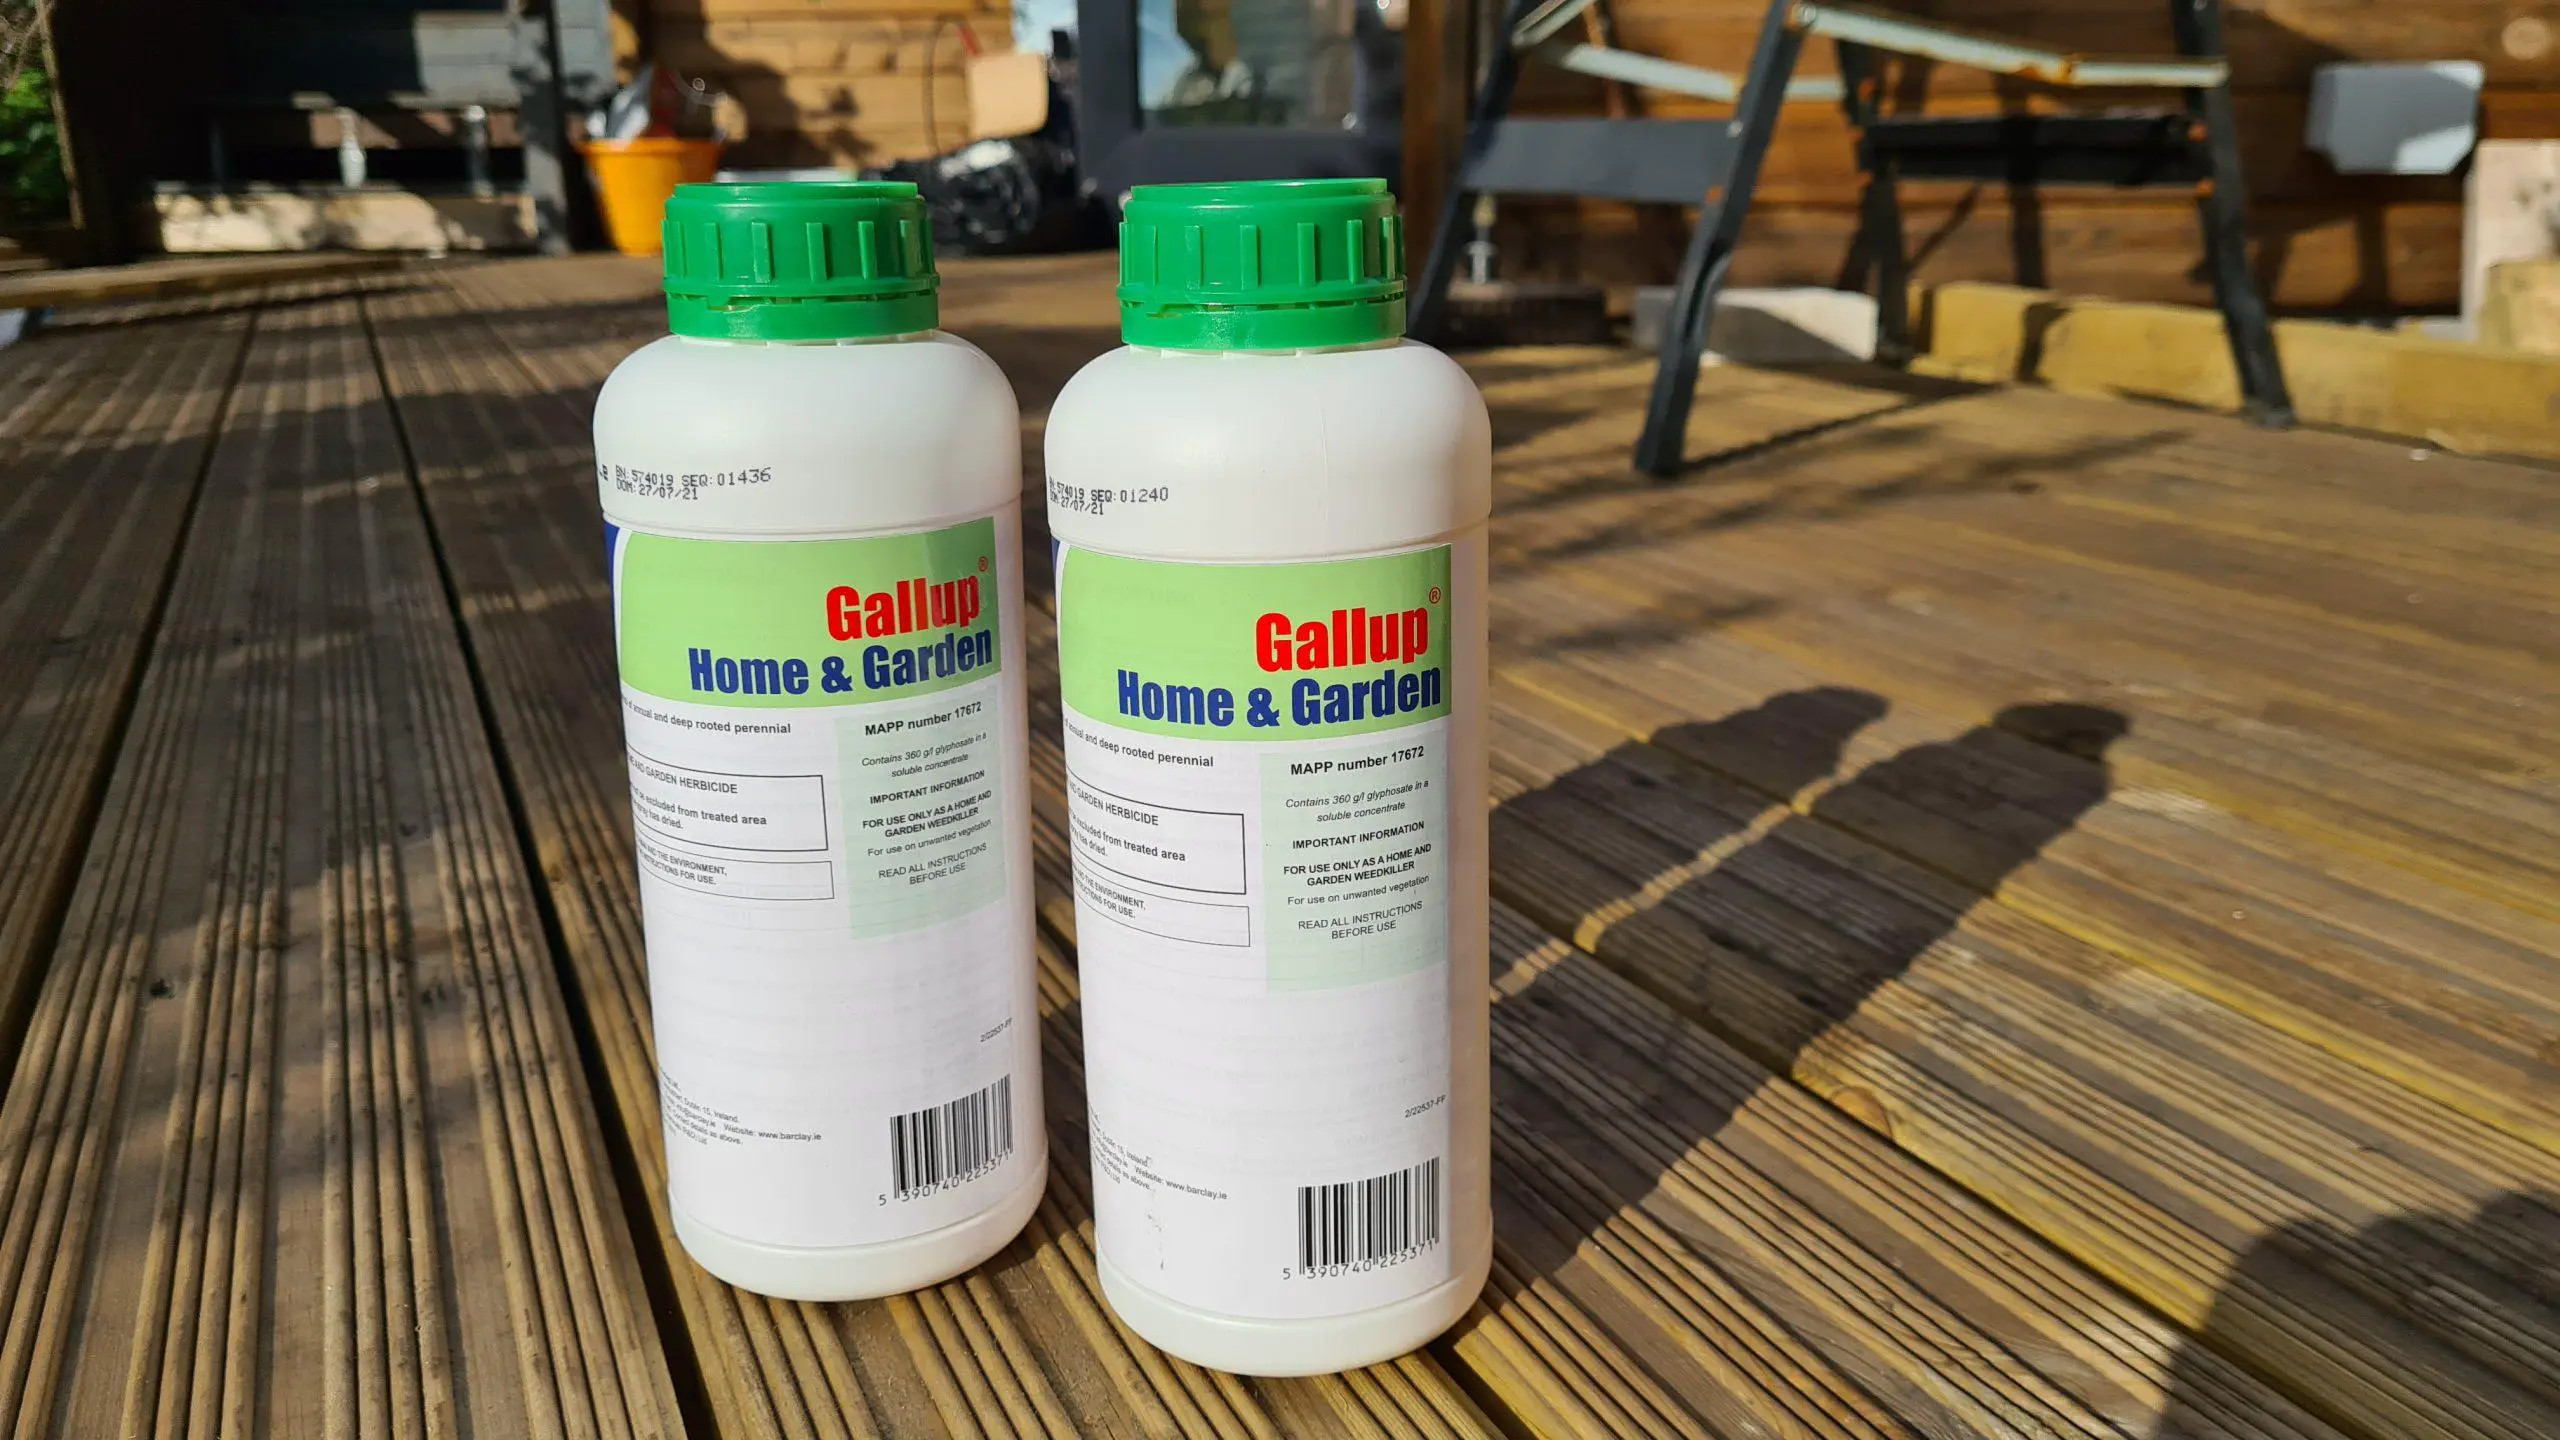 Gallup weed killer is available in 1 litre containers and is ideal for treating Japanese knotweed